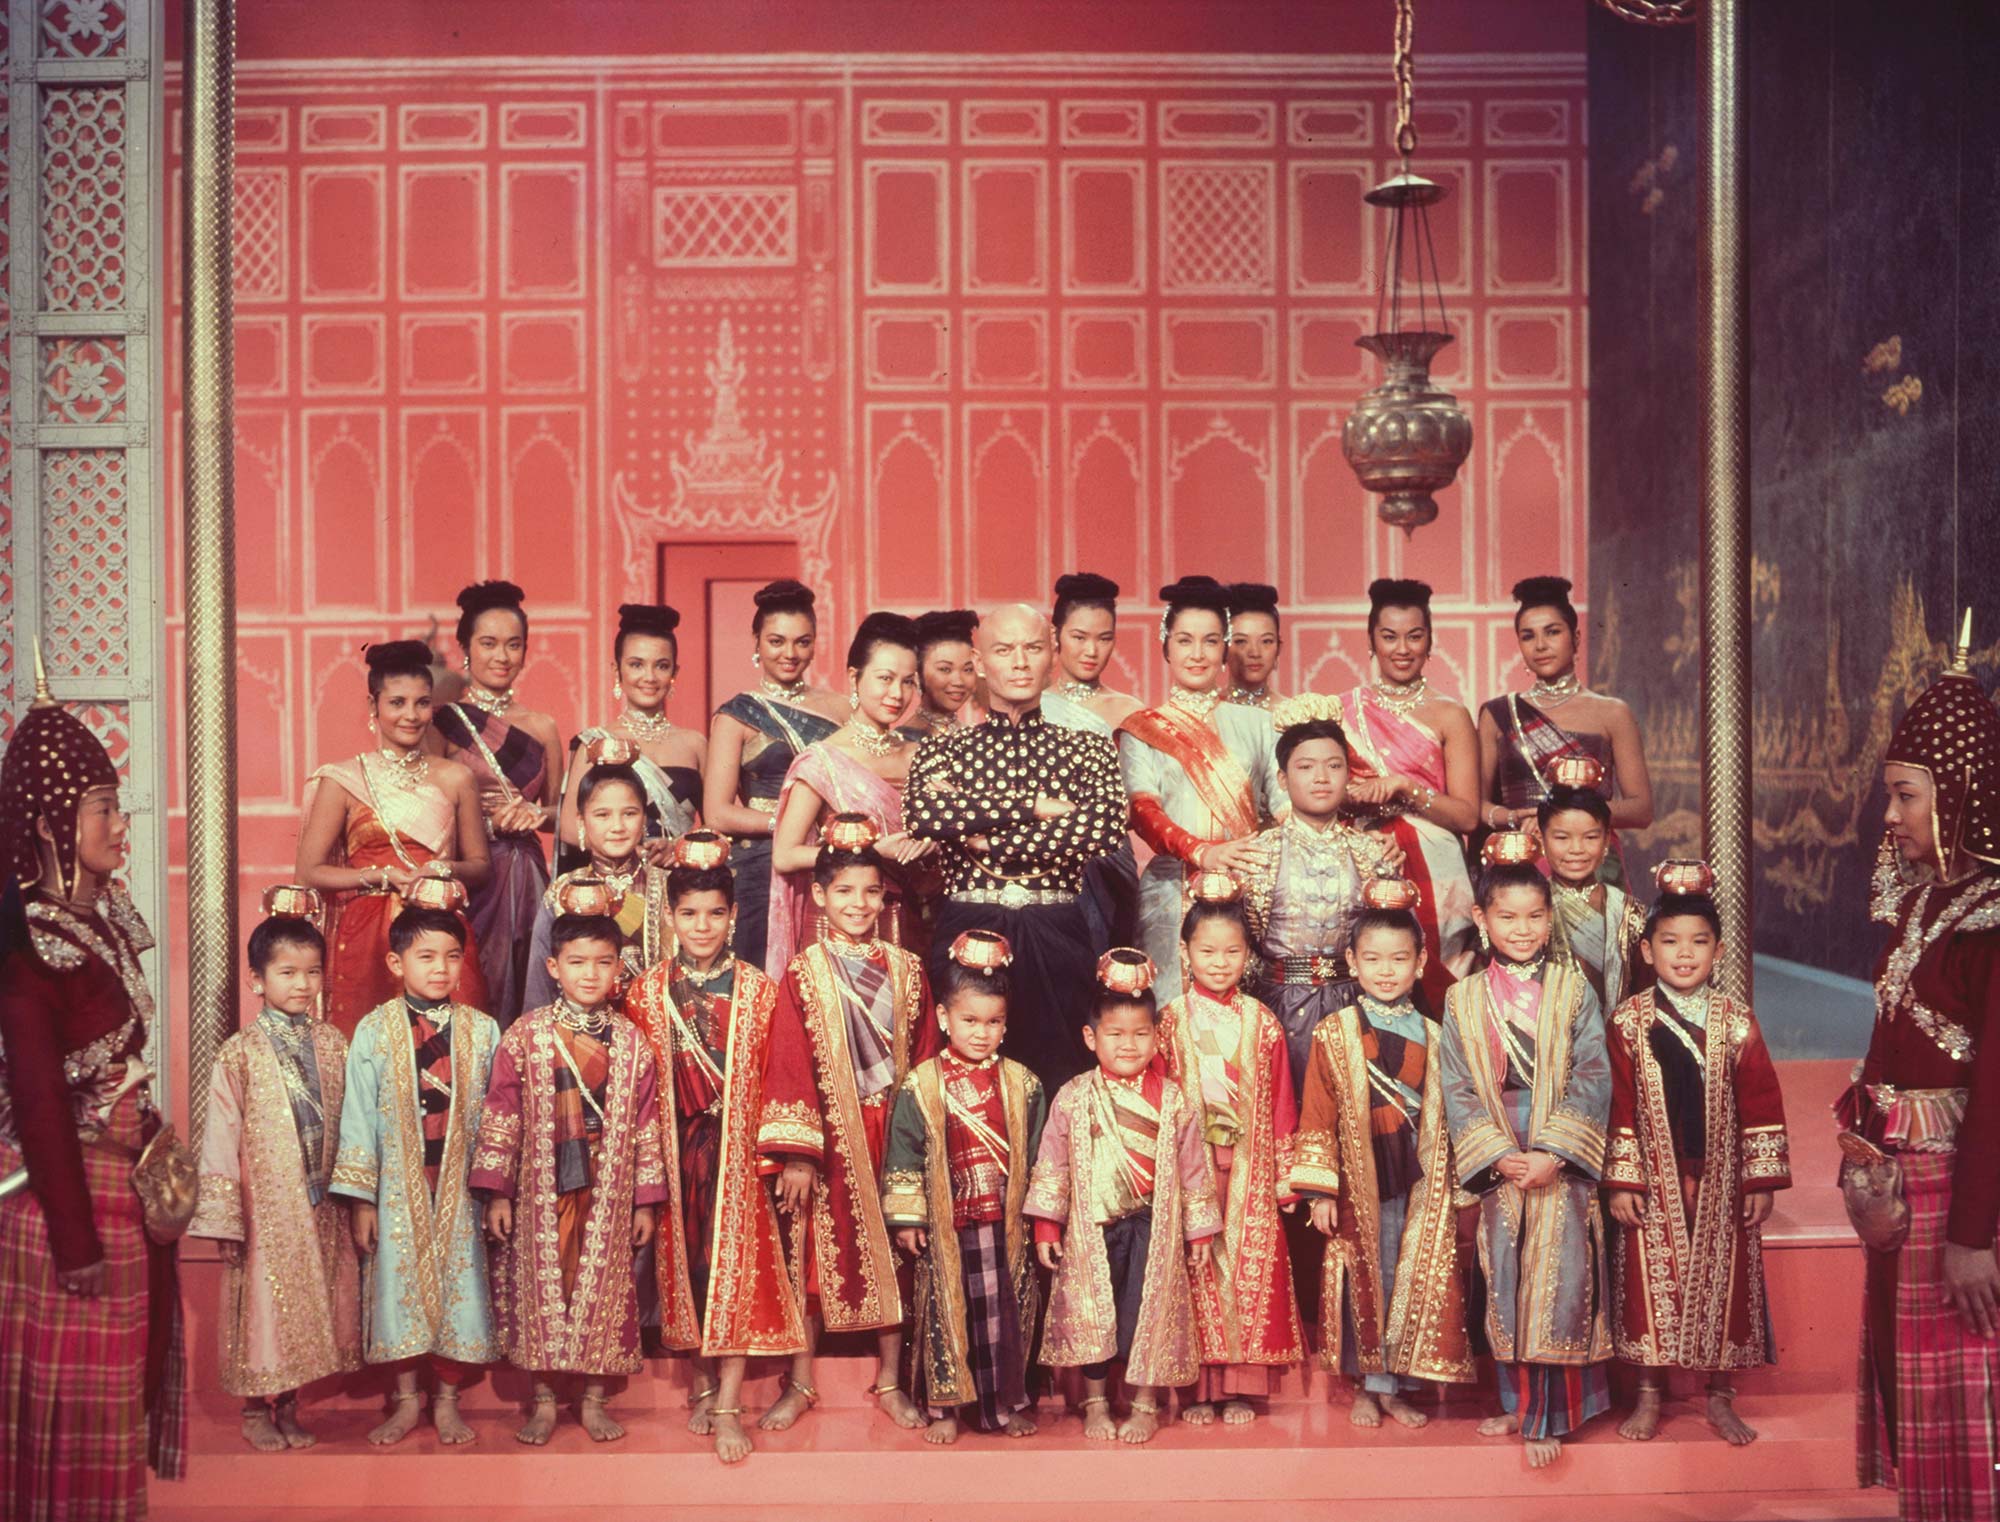 A photo from the 1956 film version of The King and I.